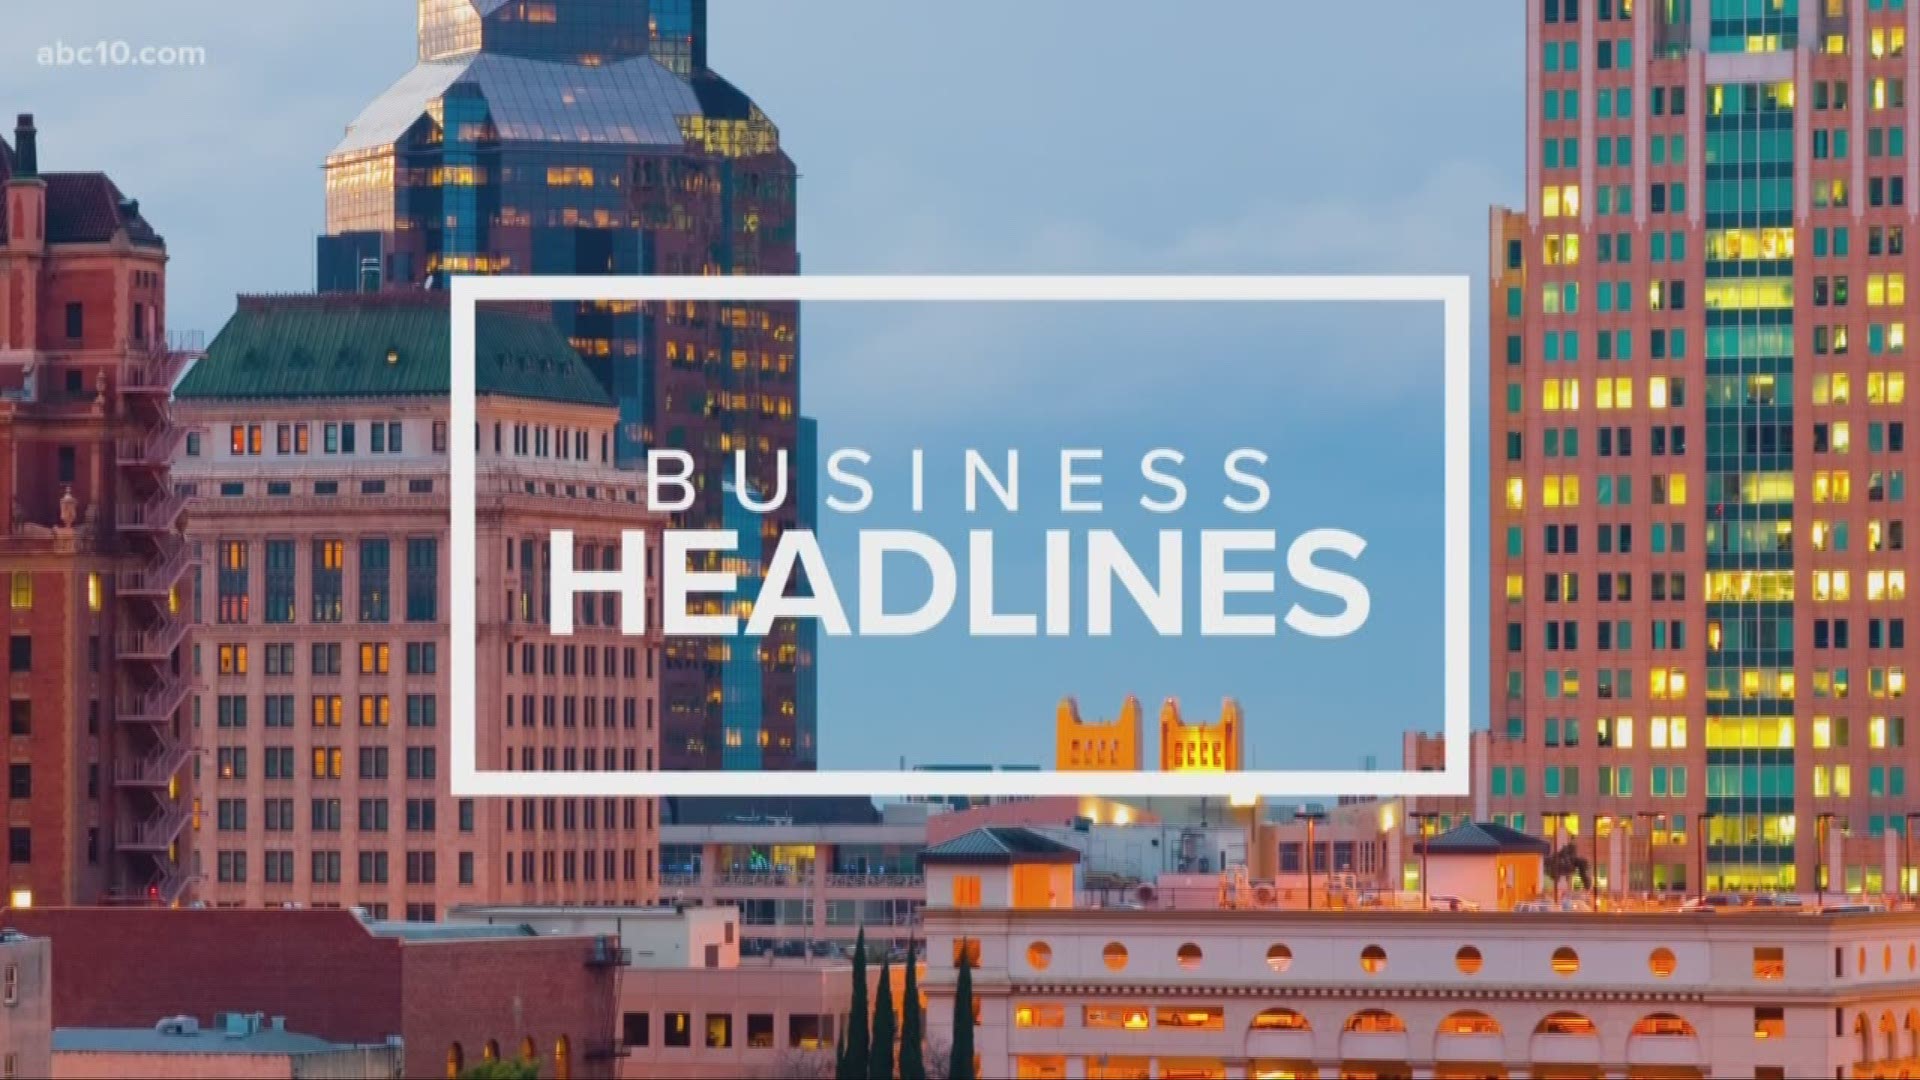 Ariane Datil has you daily dose of business headlines.